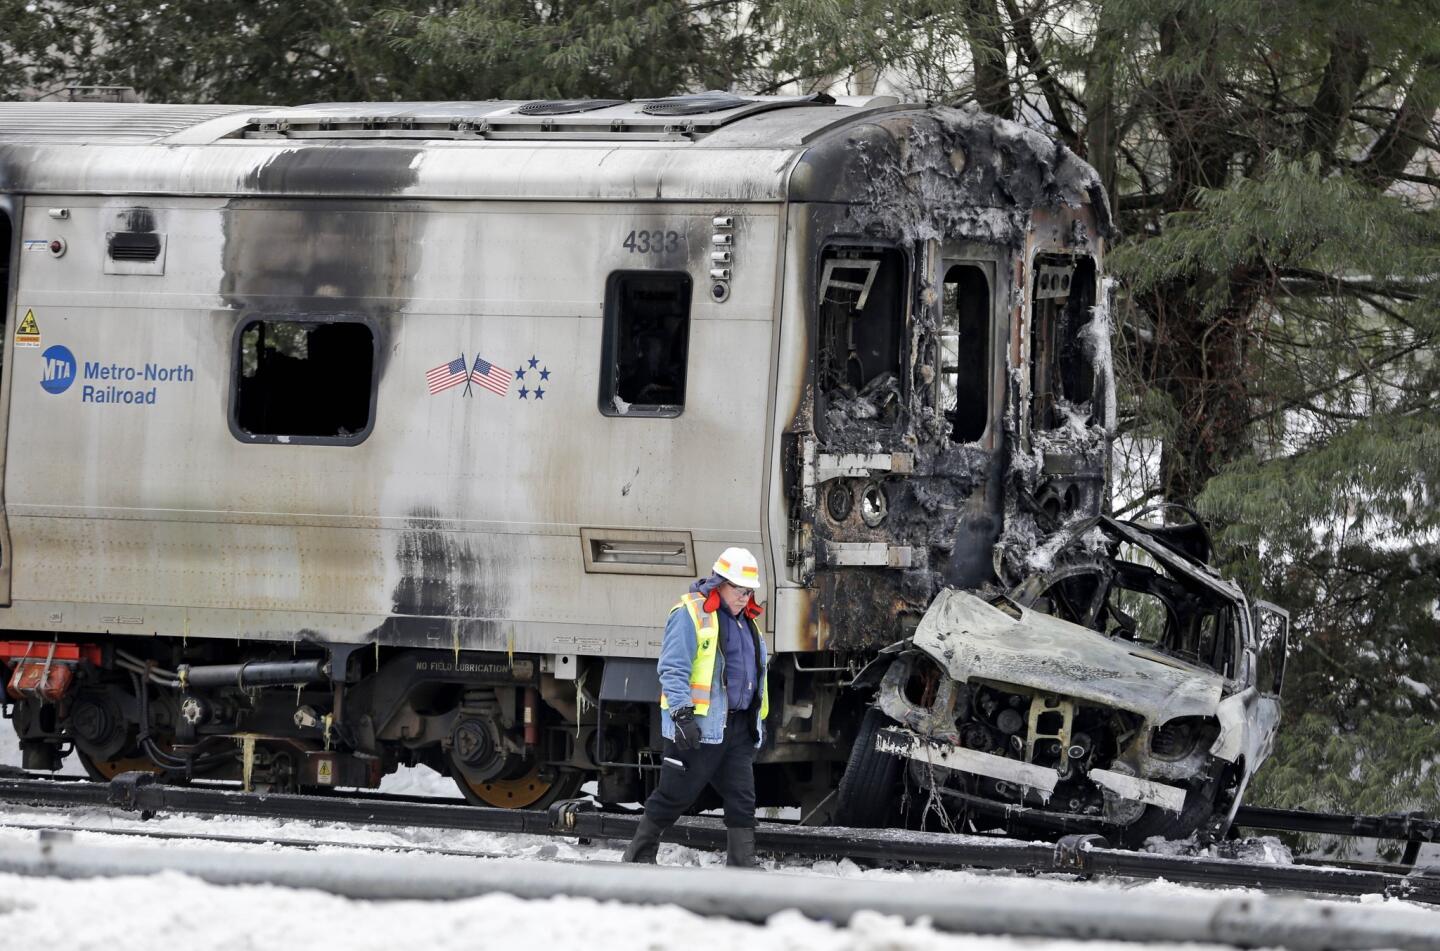 A man wearing a Federal Railroad Administration vest looks over the wreckage of a Metro-North Railroad train and an SUV in Valhalla, N.Y.